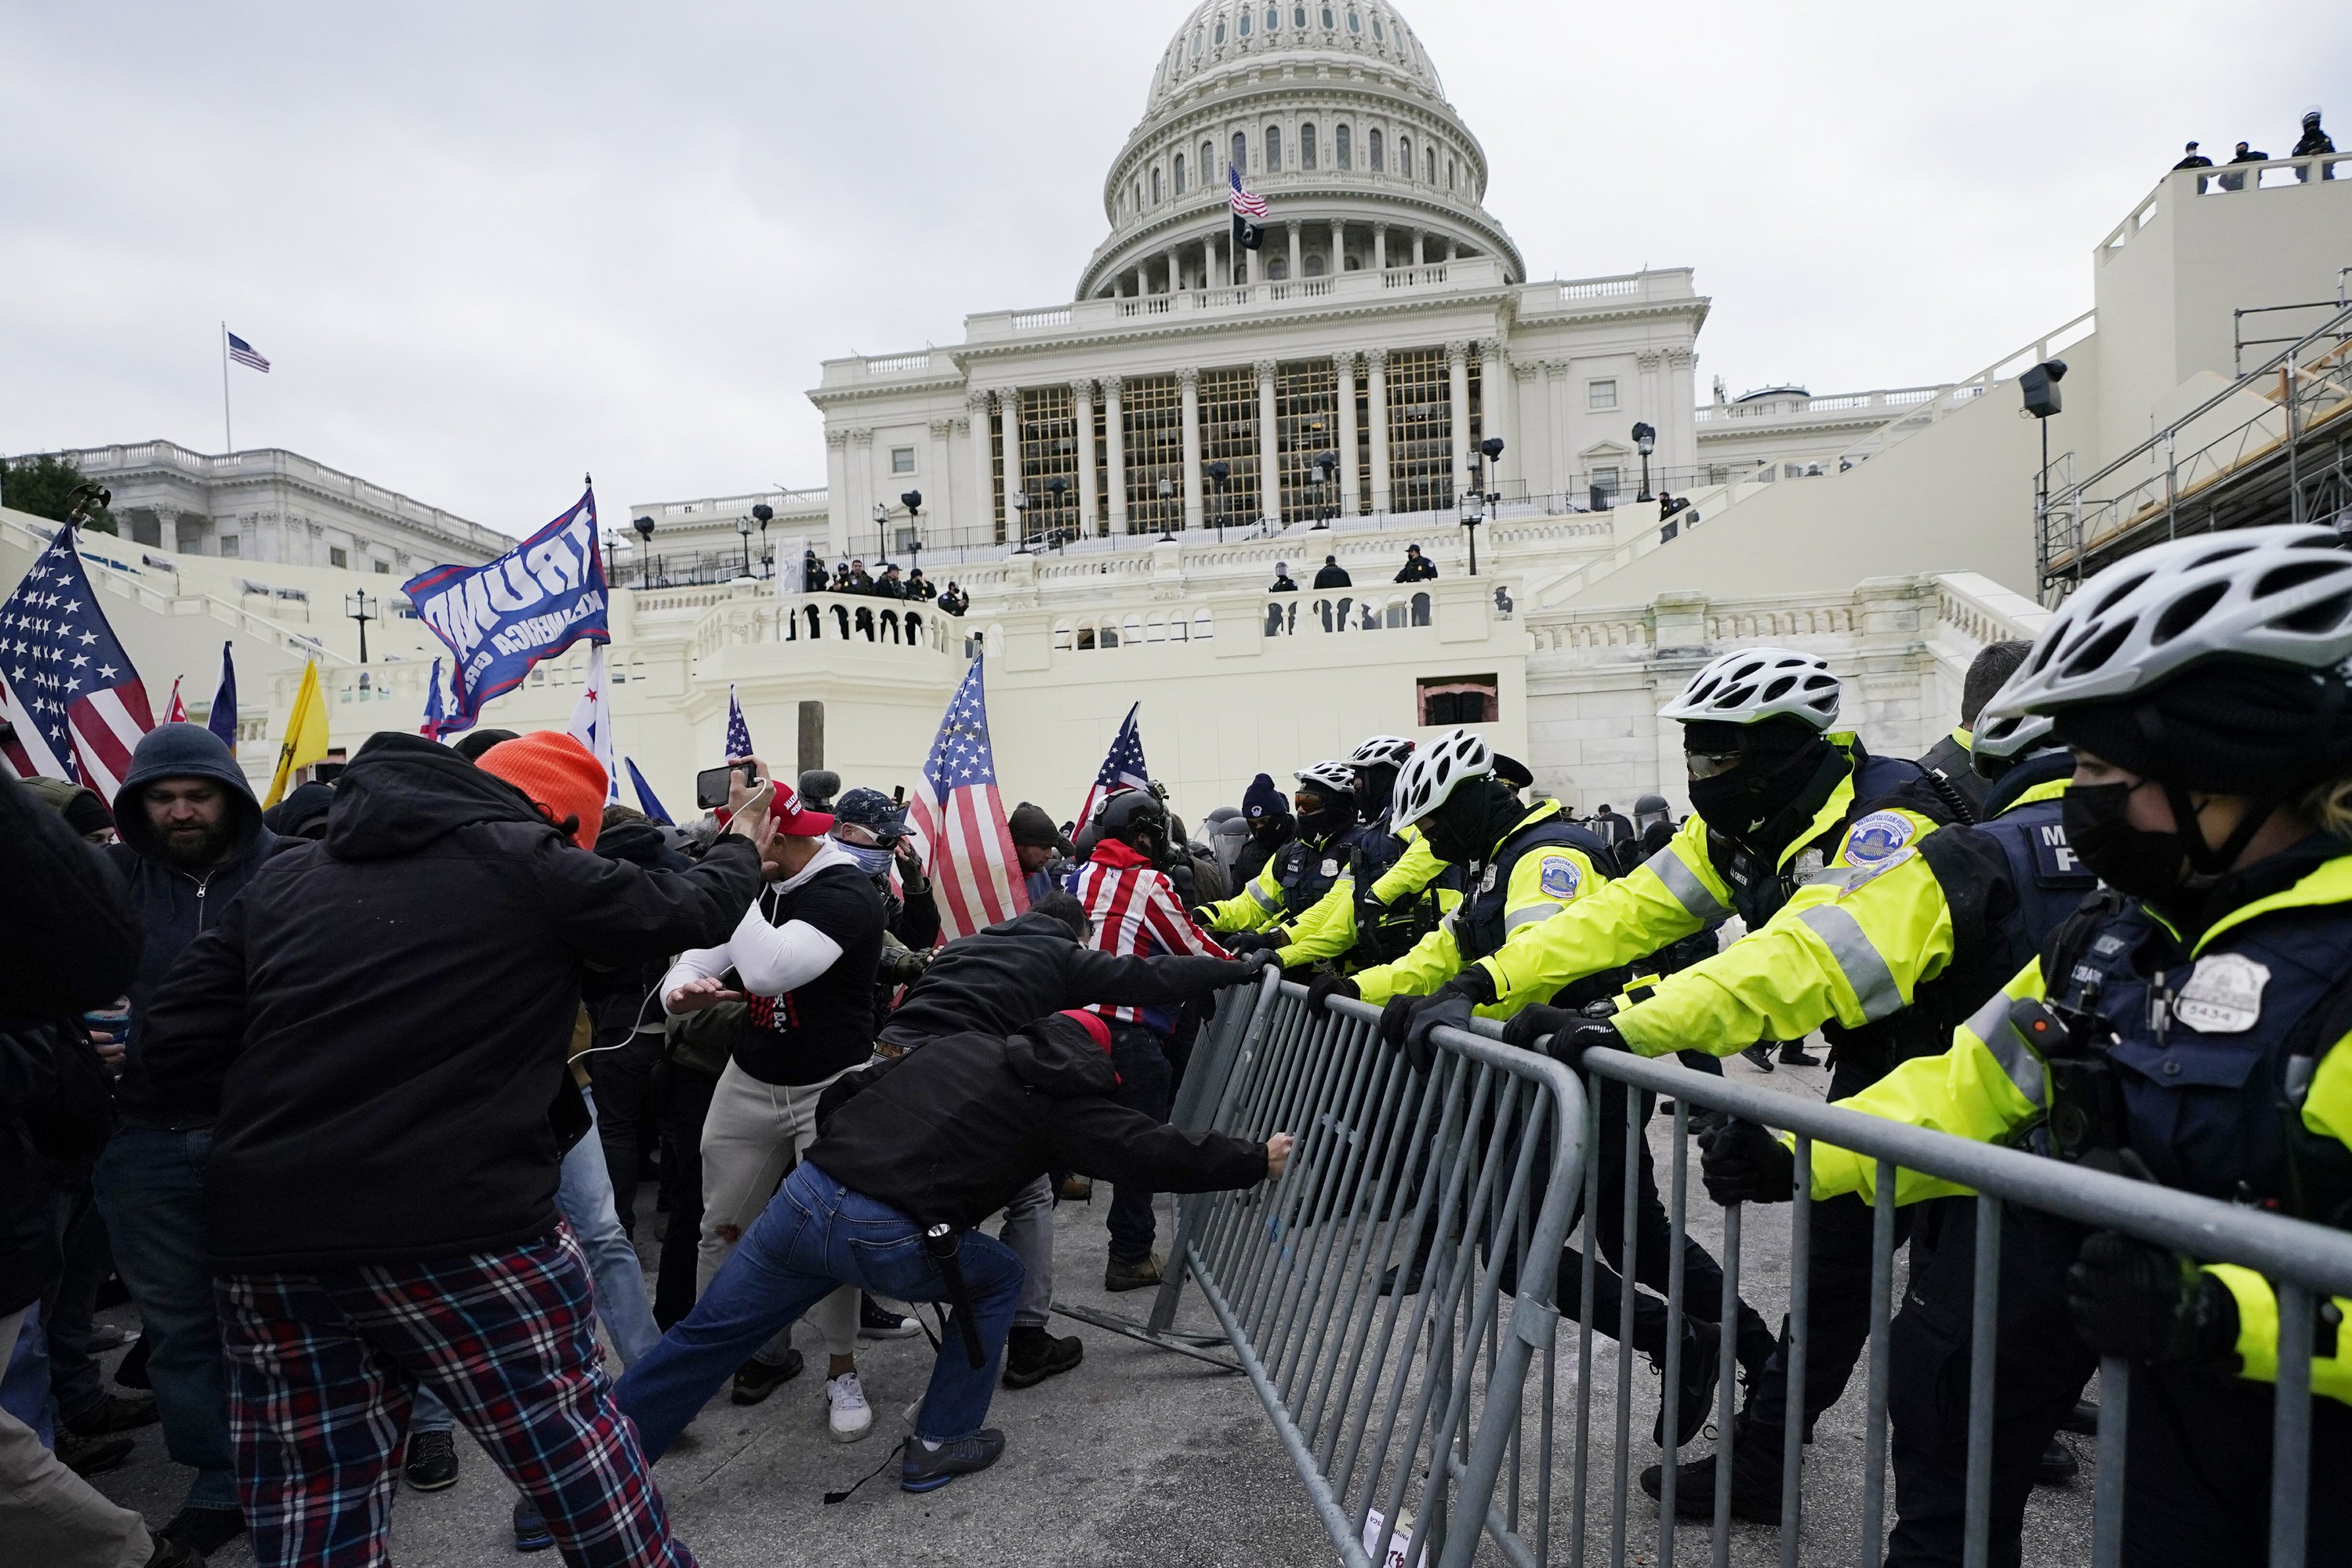 Trump supporters storm the US Capitol, clash with police